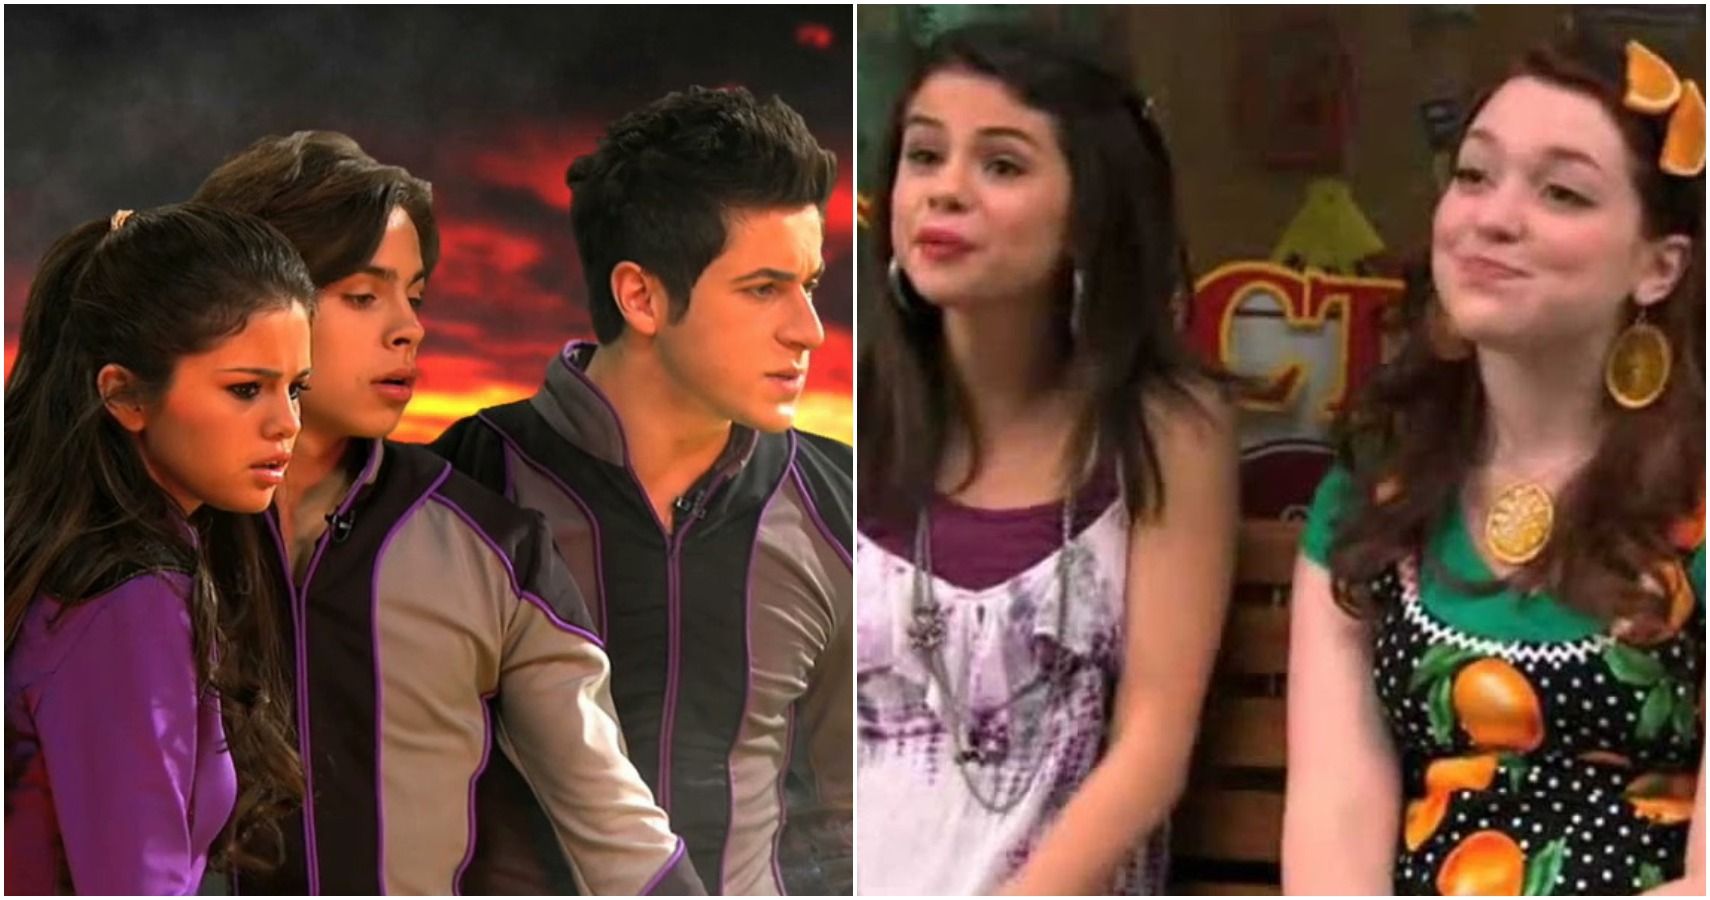 Wizards Of Waverly Place 5 Things That Changed After The Pilot 5 That Stayed The Same